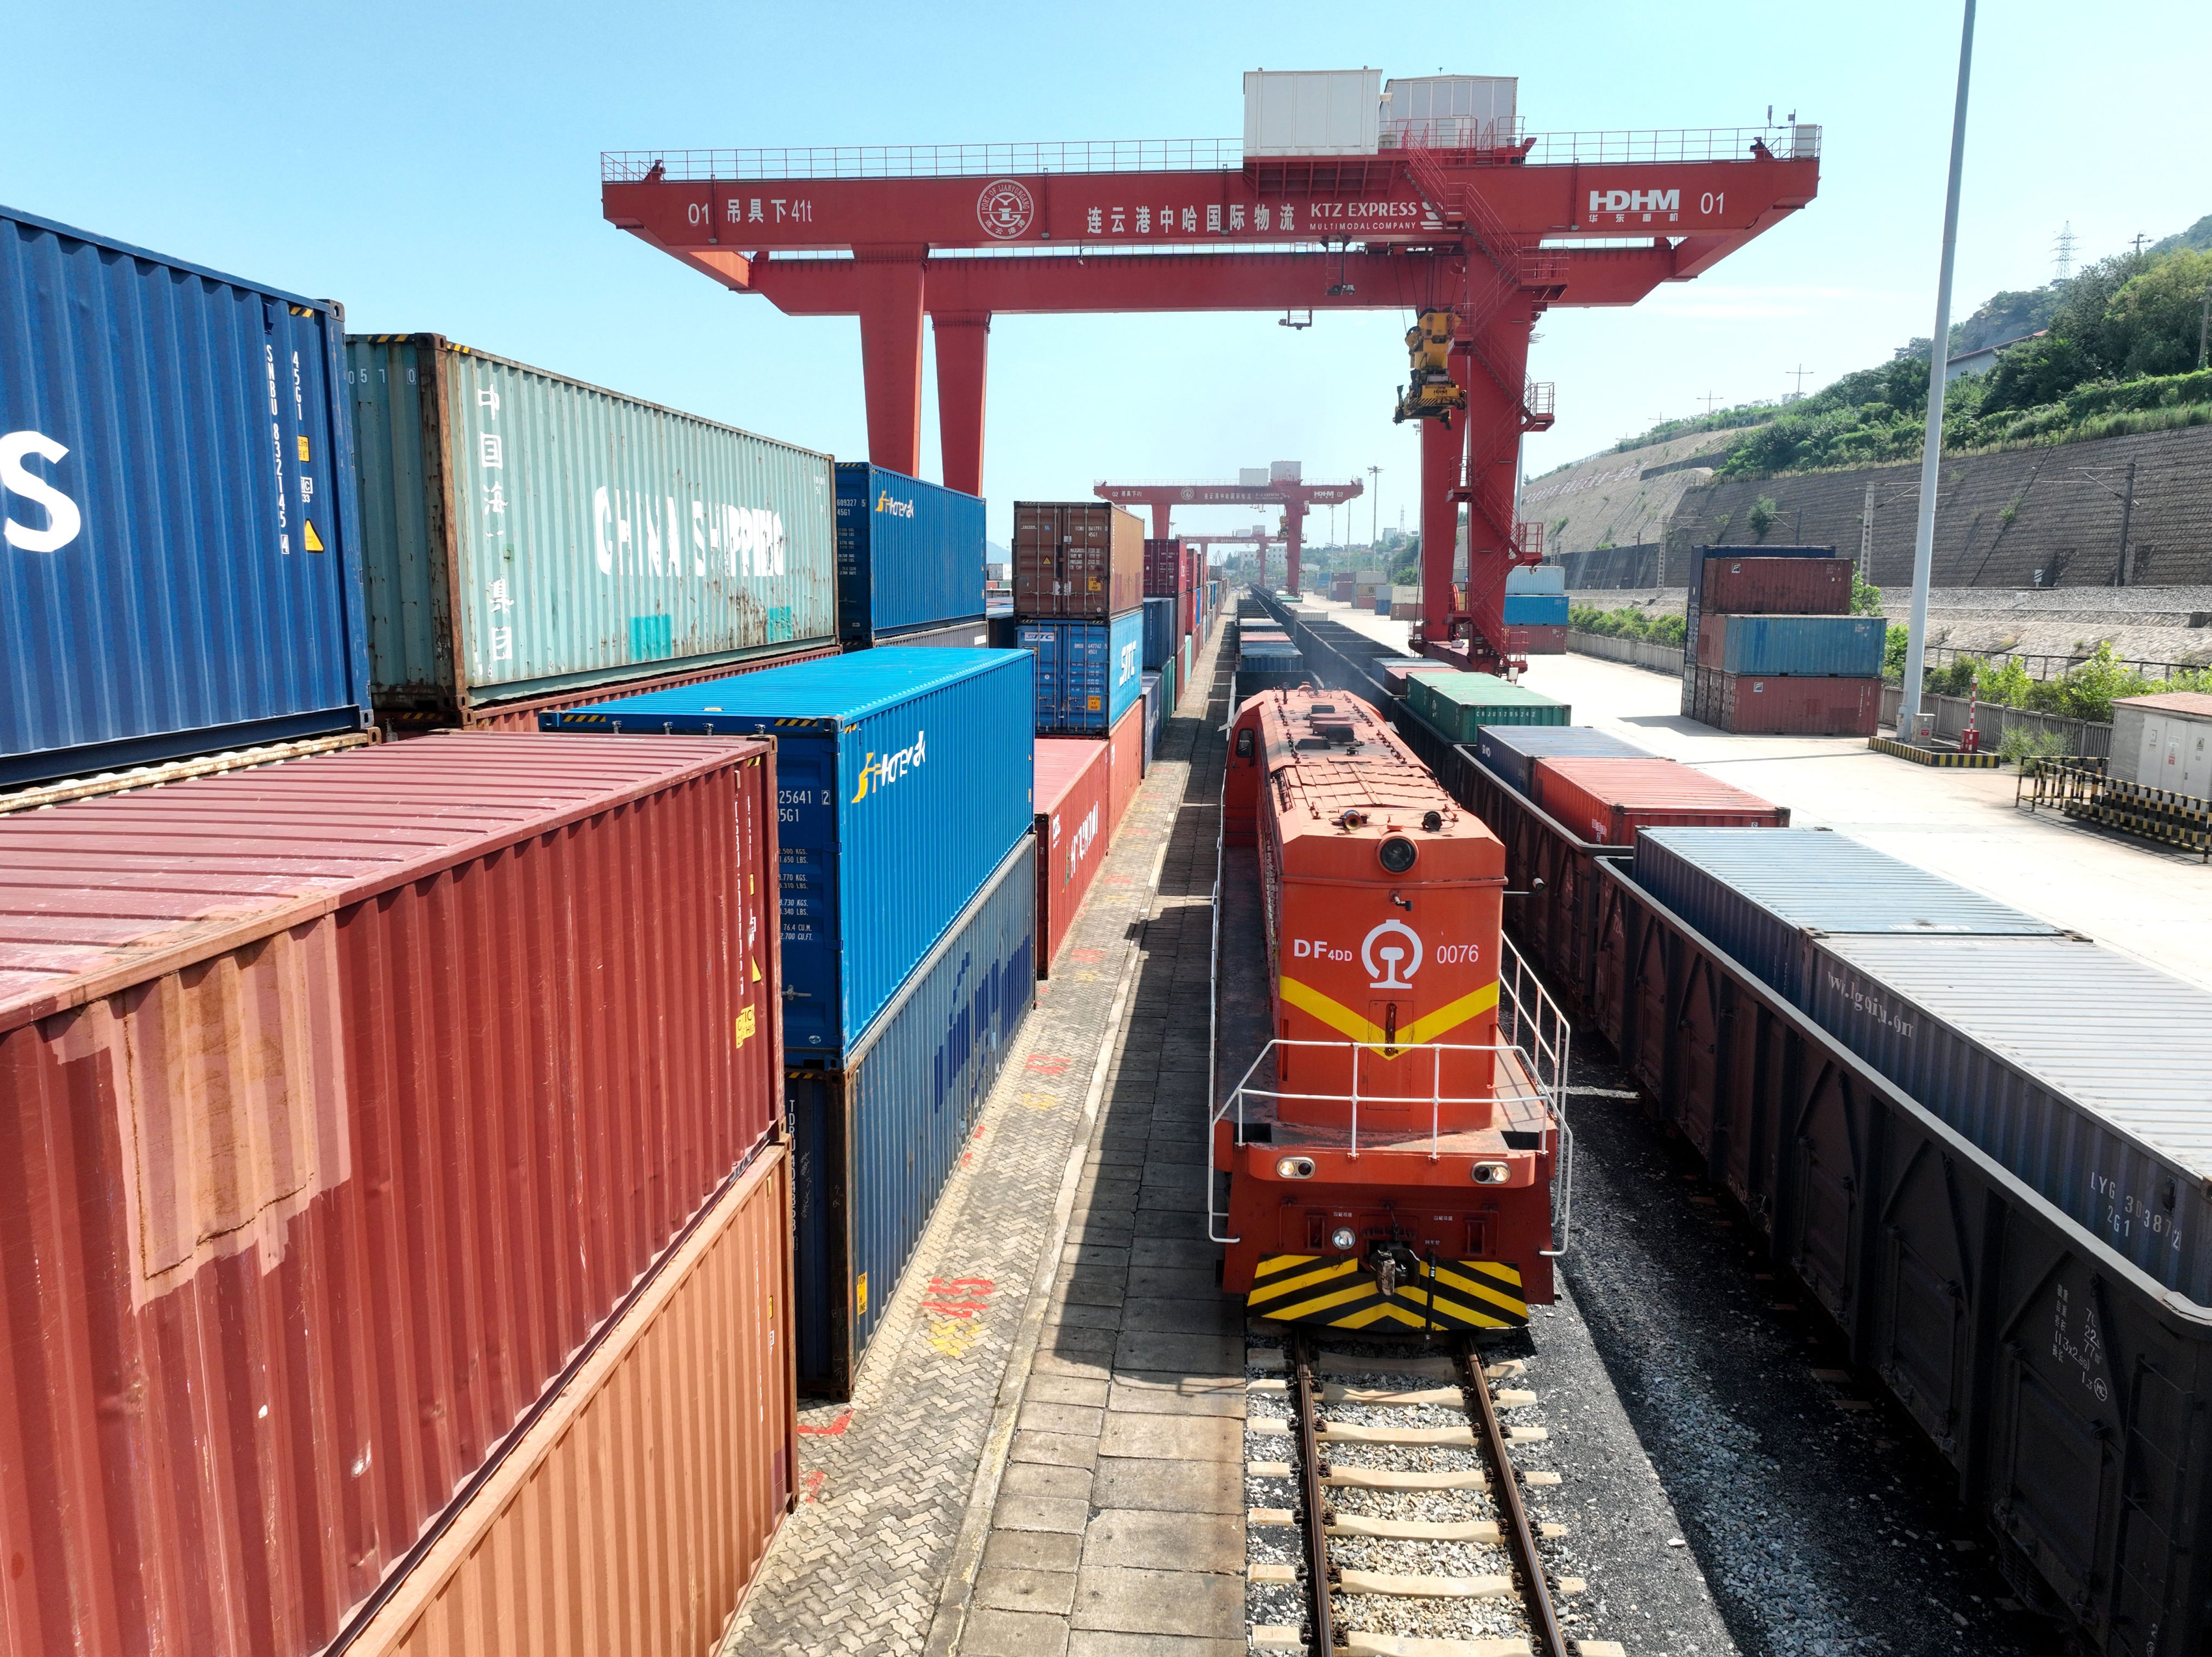 Some 3,850 Europe-bound freight trains passed through Inner Mongolia in the first half of the year. Photo: CFOTO/Future Publishing via Getty Images